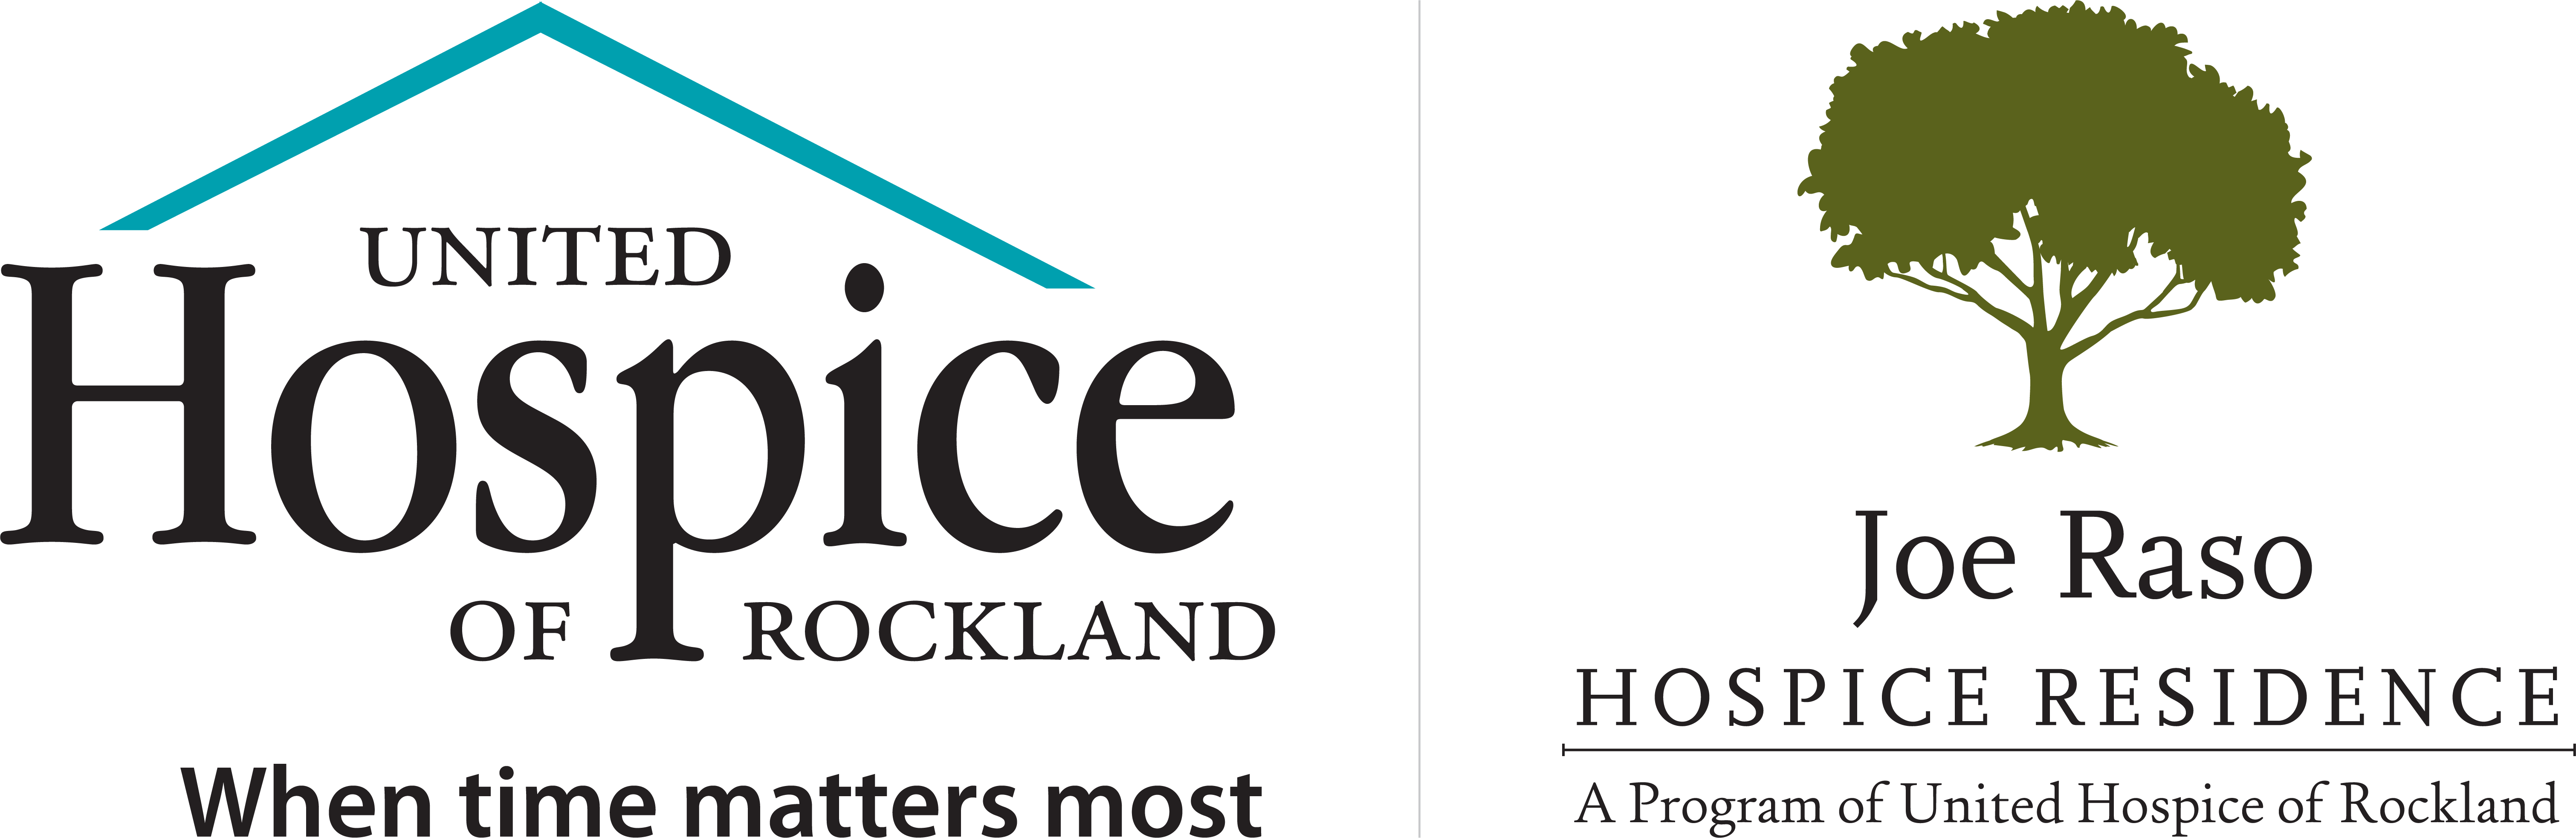 Hospice Logo - United Hospice of Rockland. When time matters most